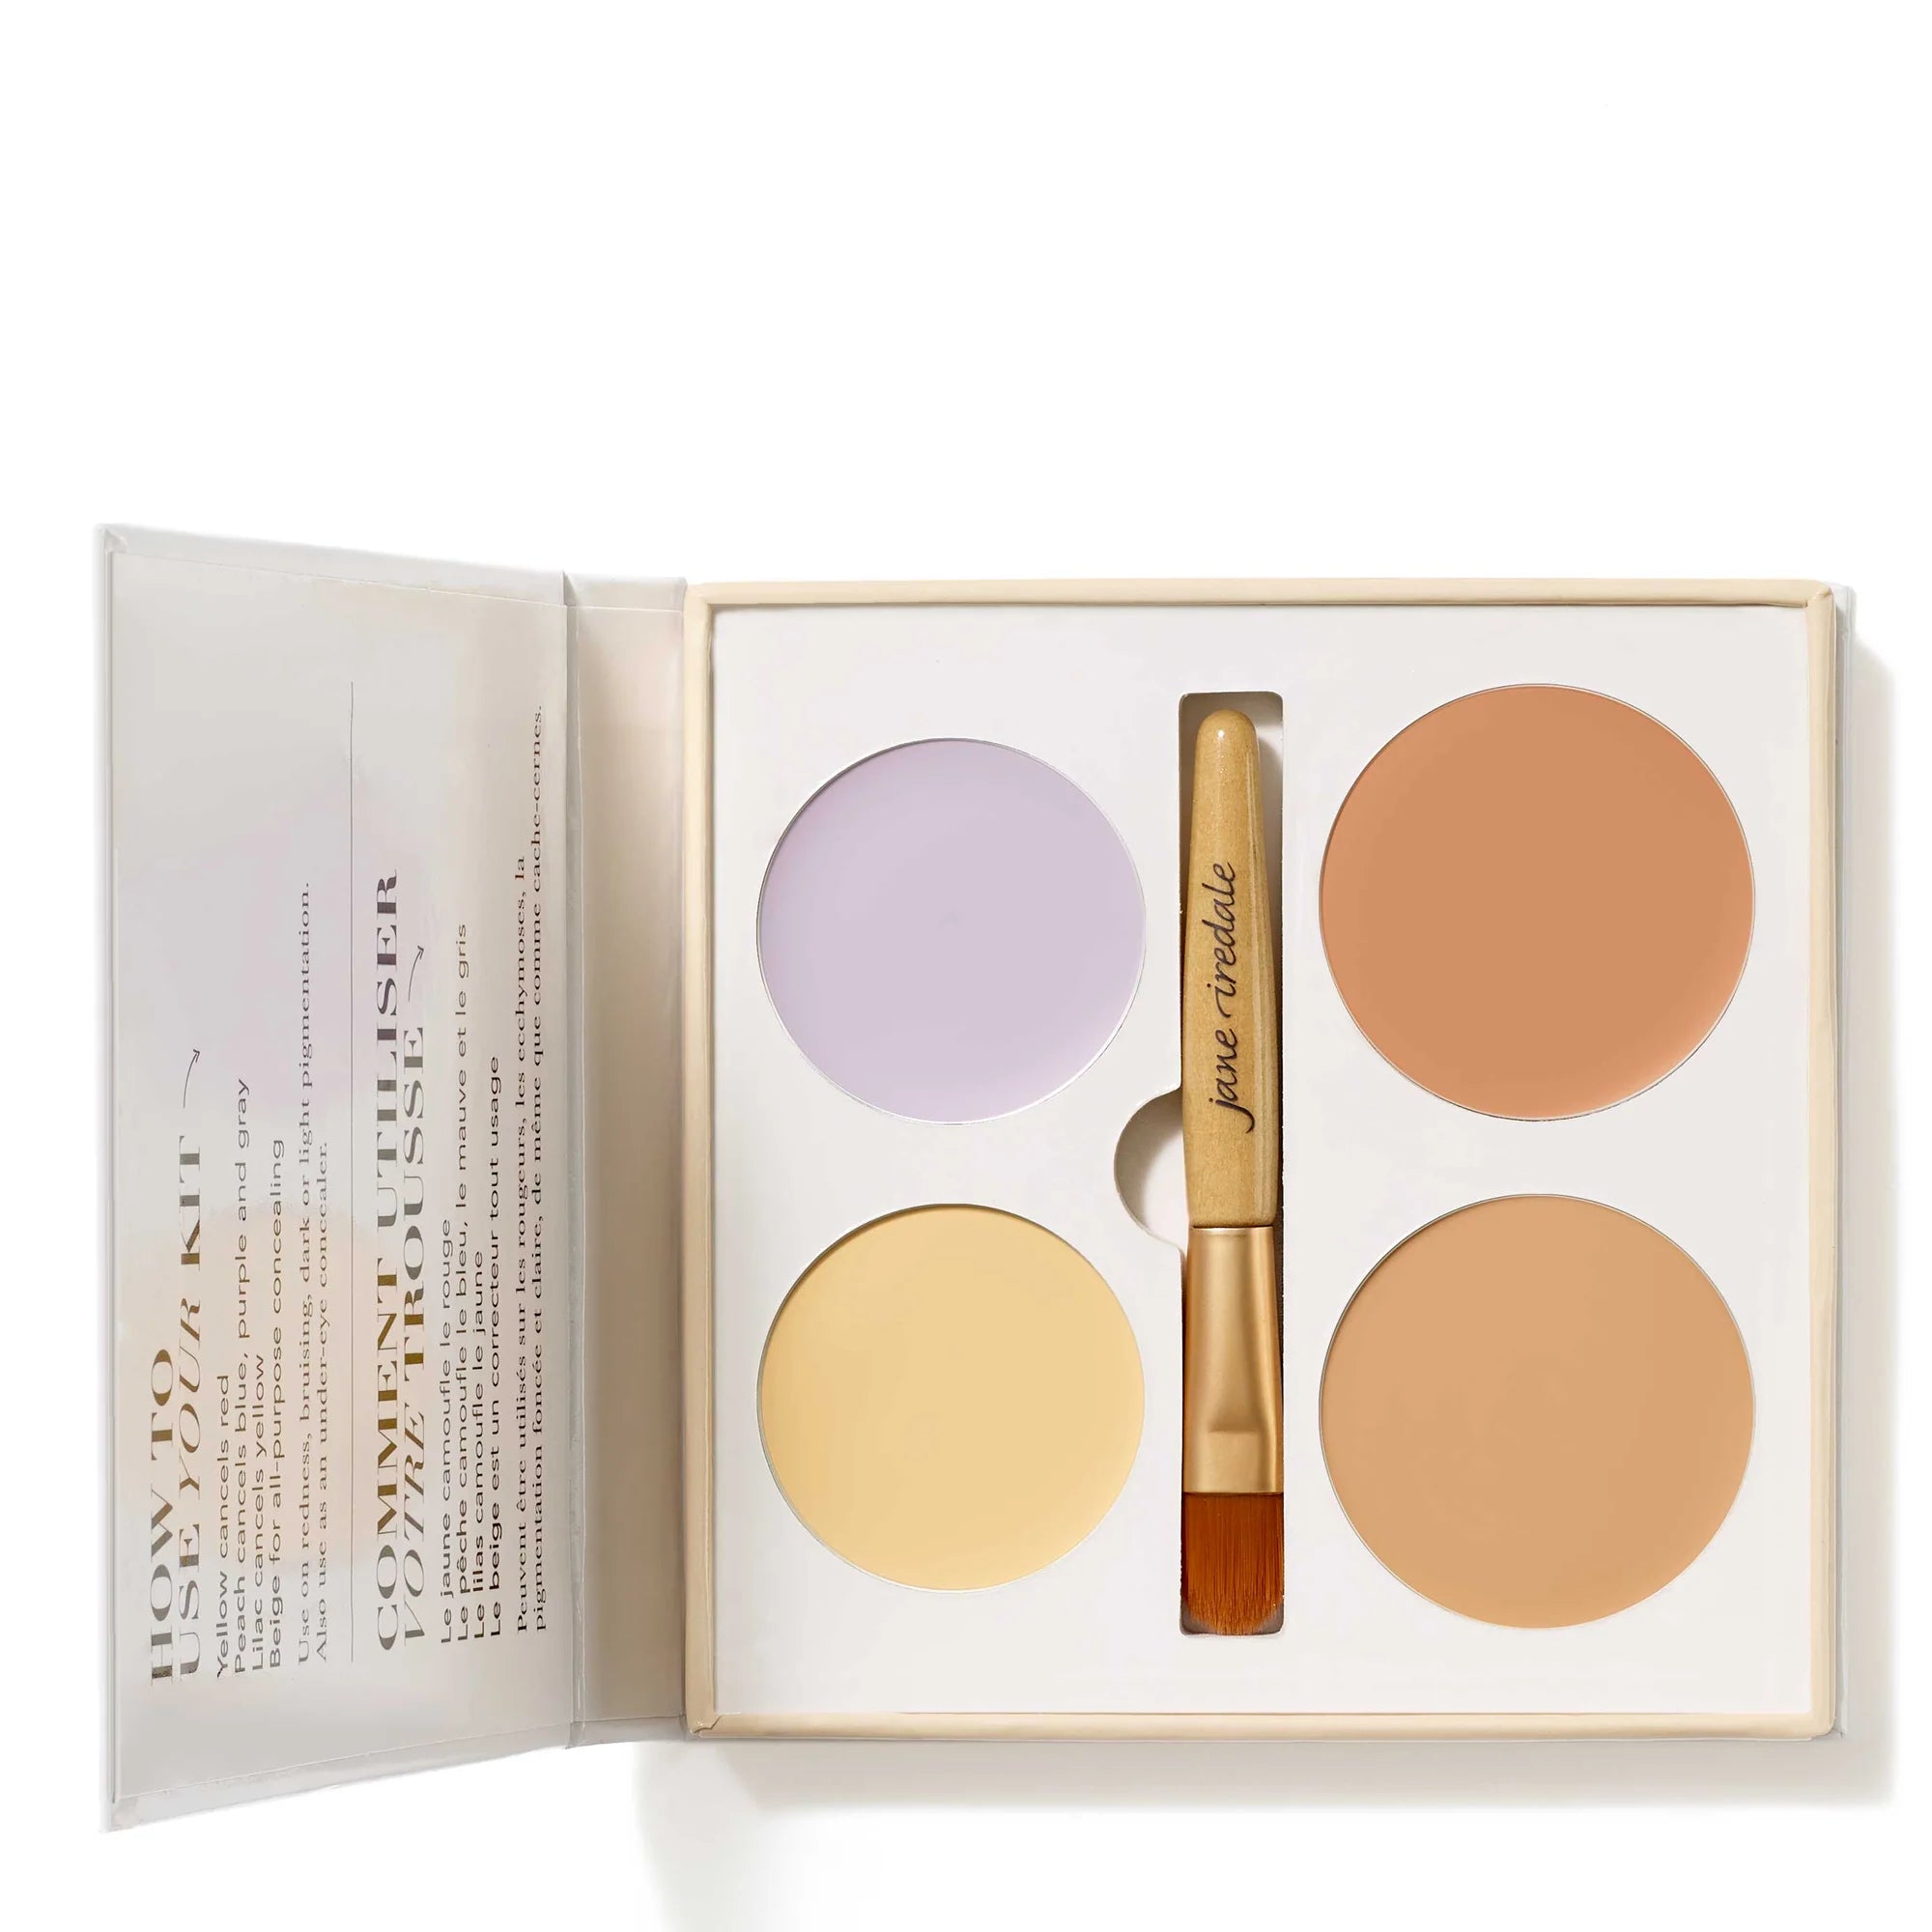 Jane Iredale's Corrective Colors has Four shades to correct and conceal discoloration.